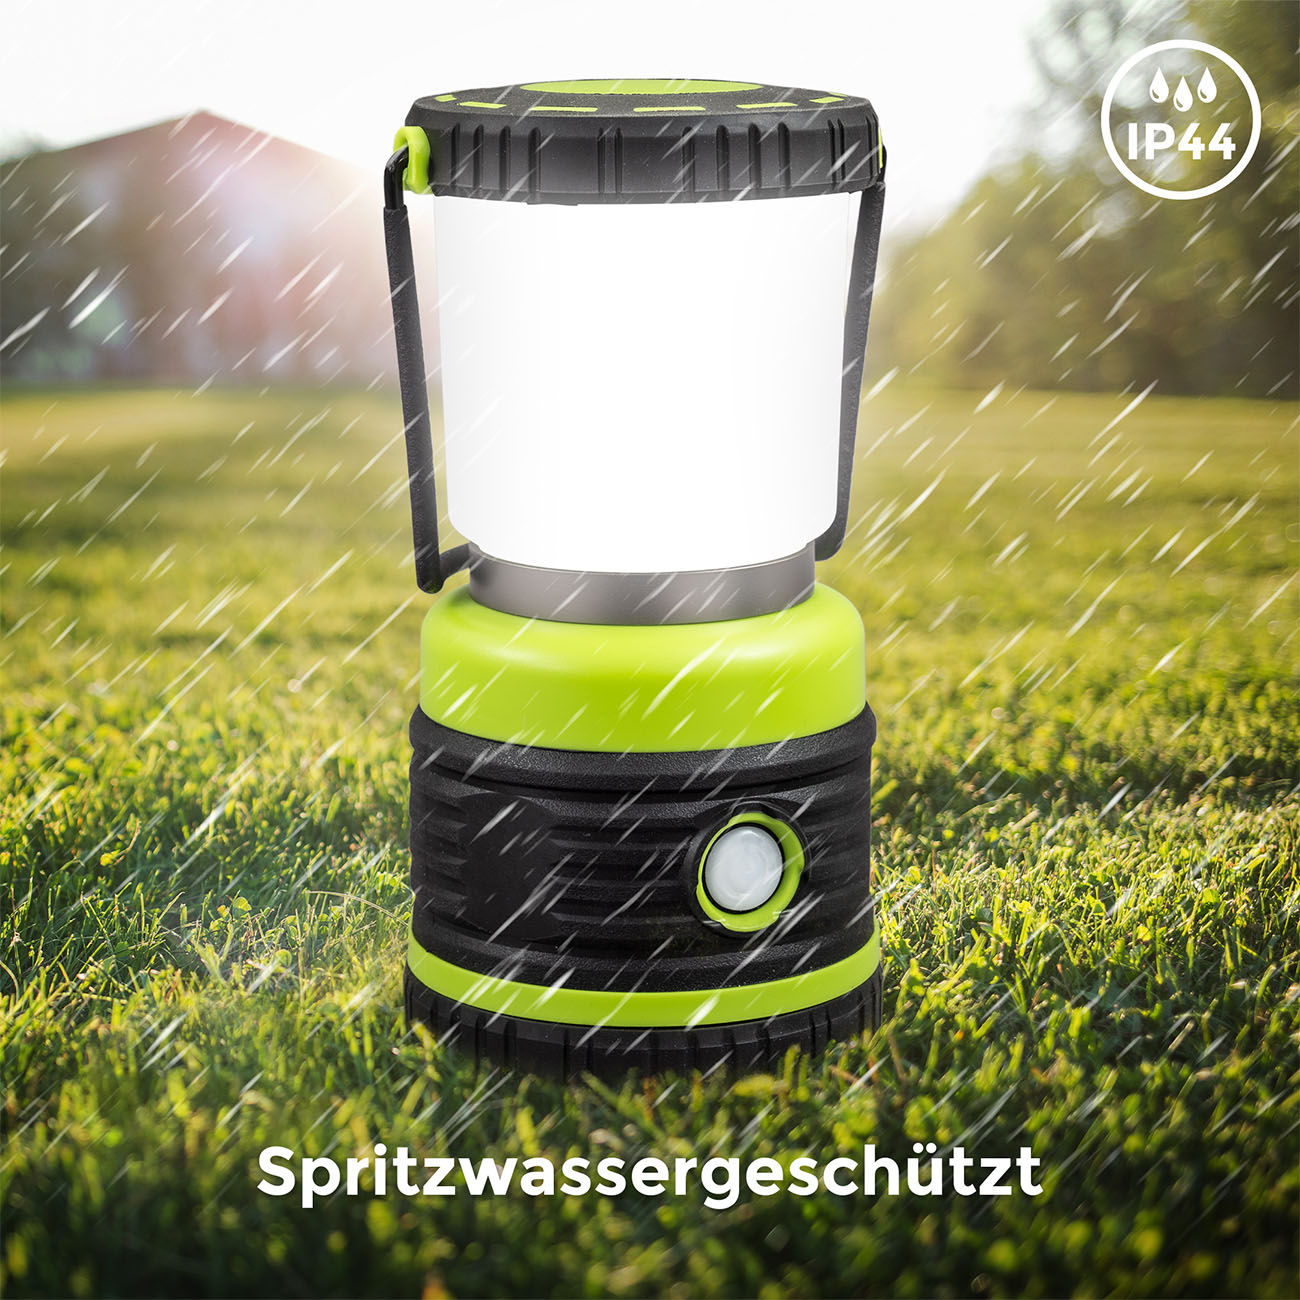 LED Outdoor Campingleuchte mit Tragegriff - 6